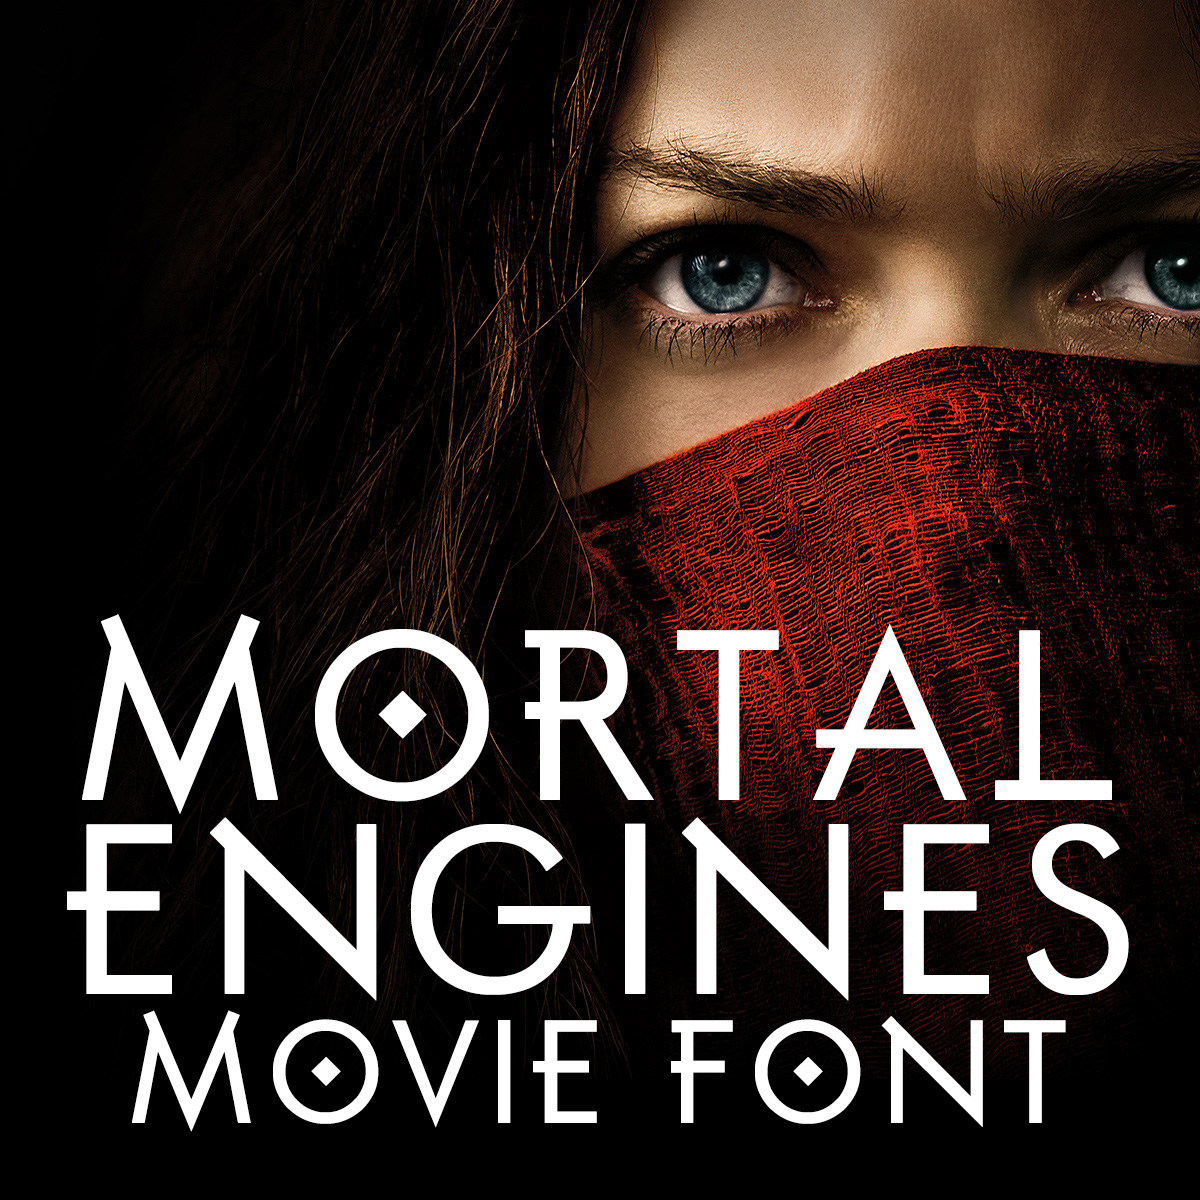 Mortal Engines 2018 Movie Wallpapers